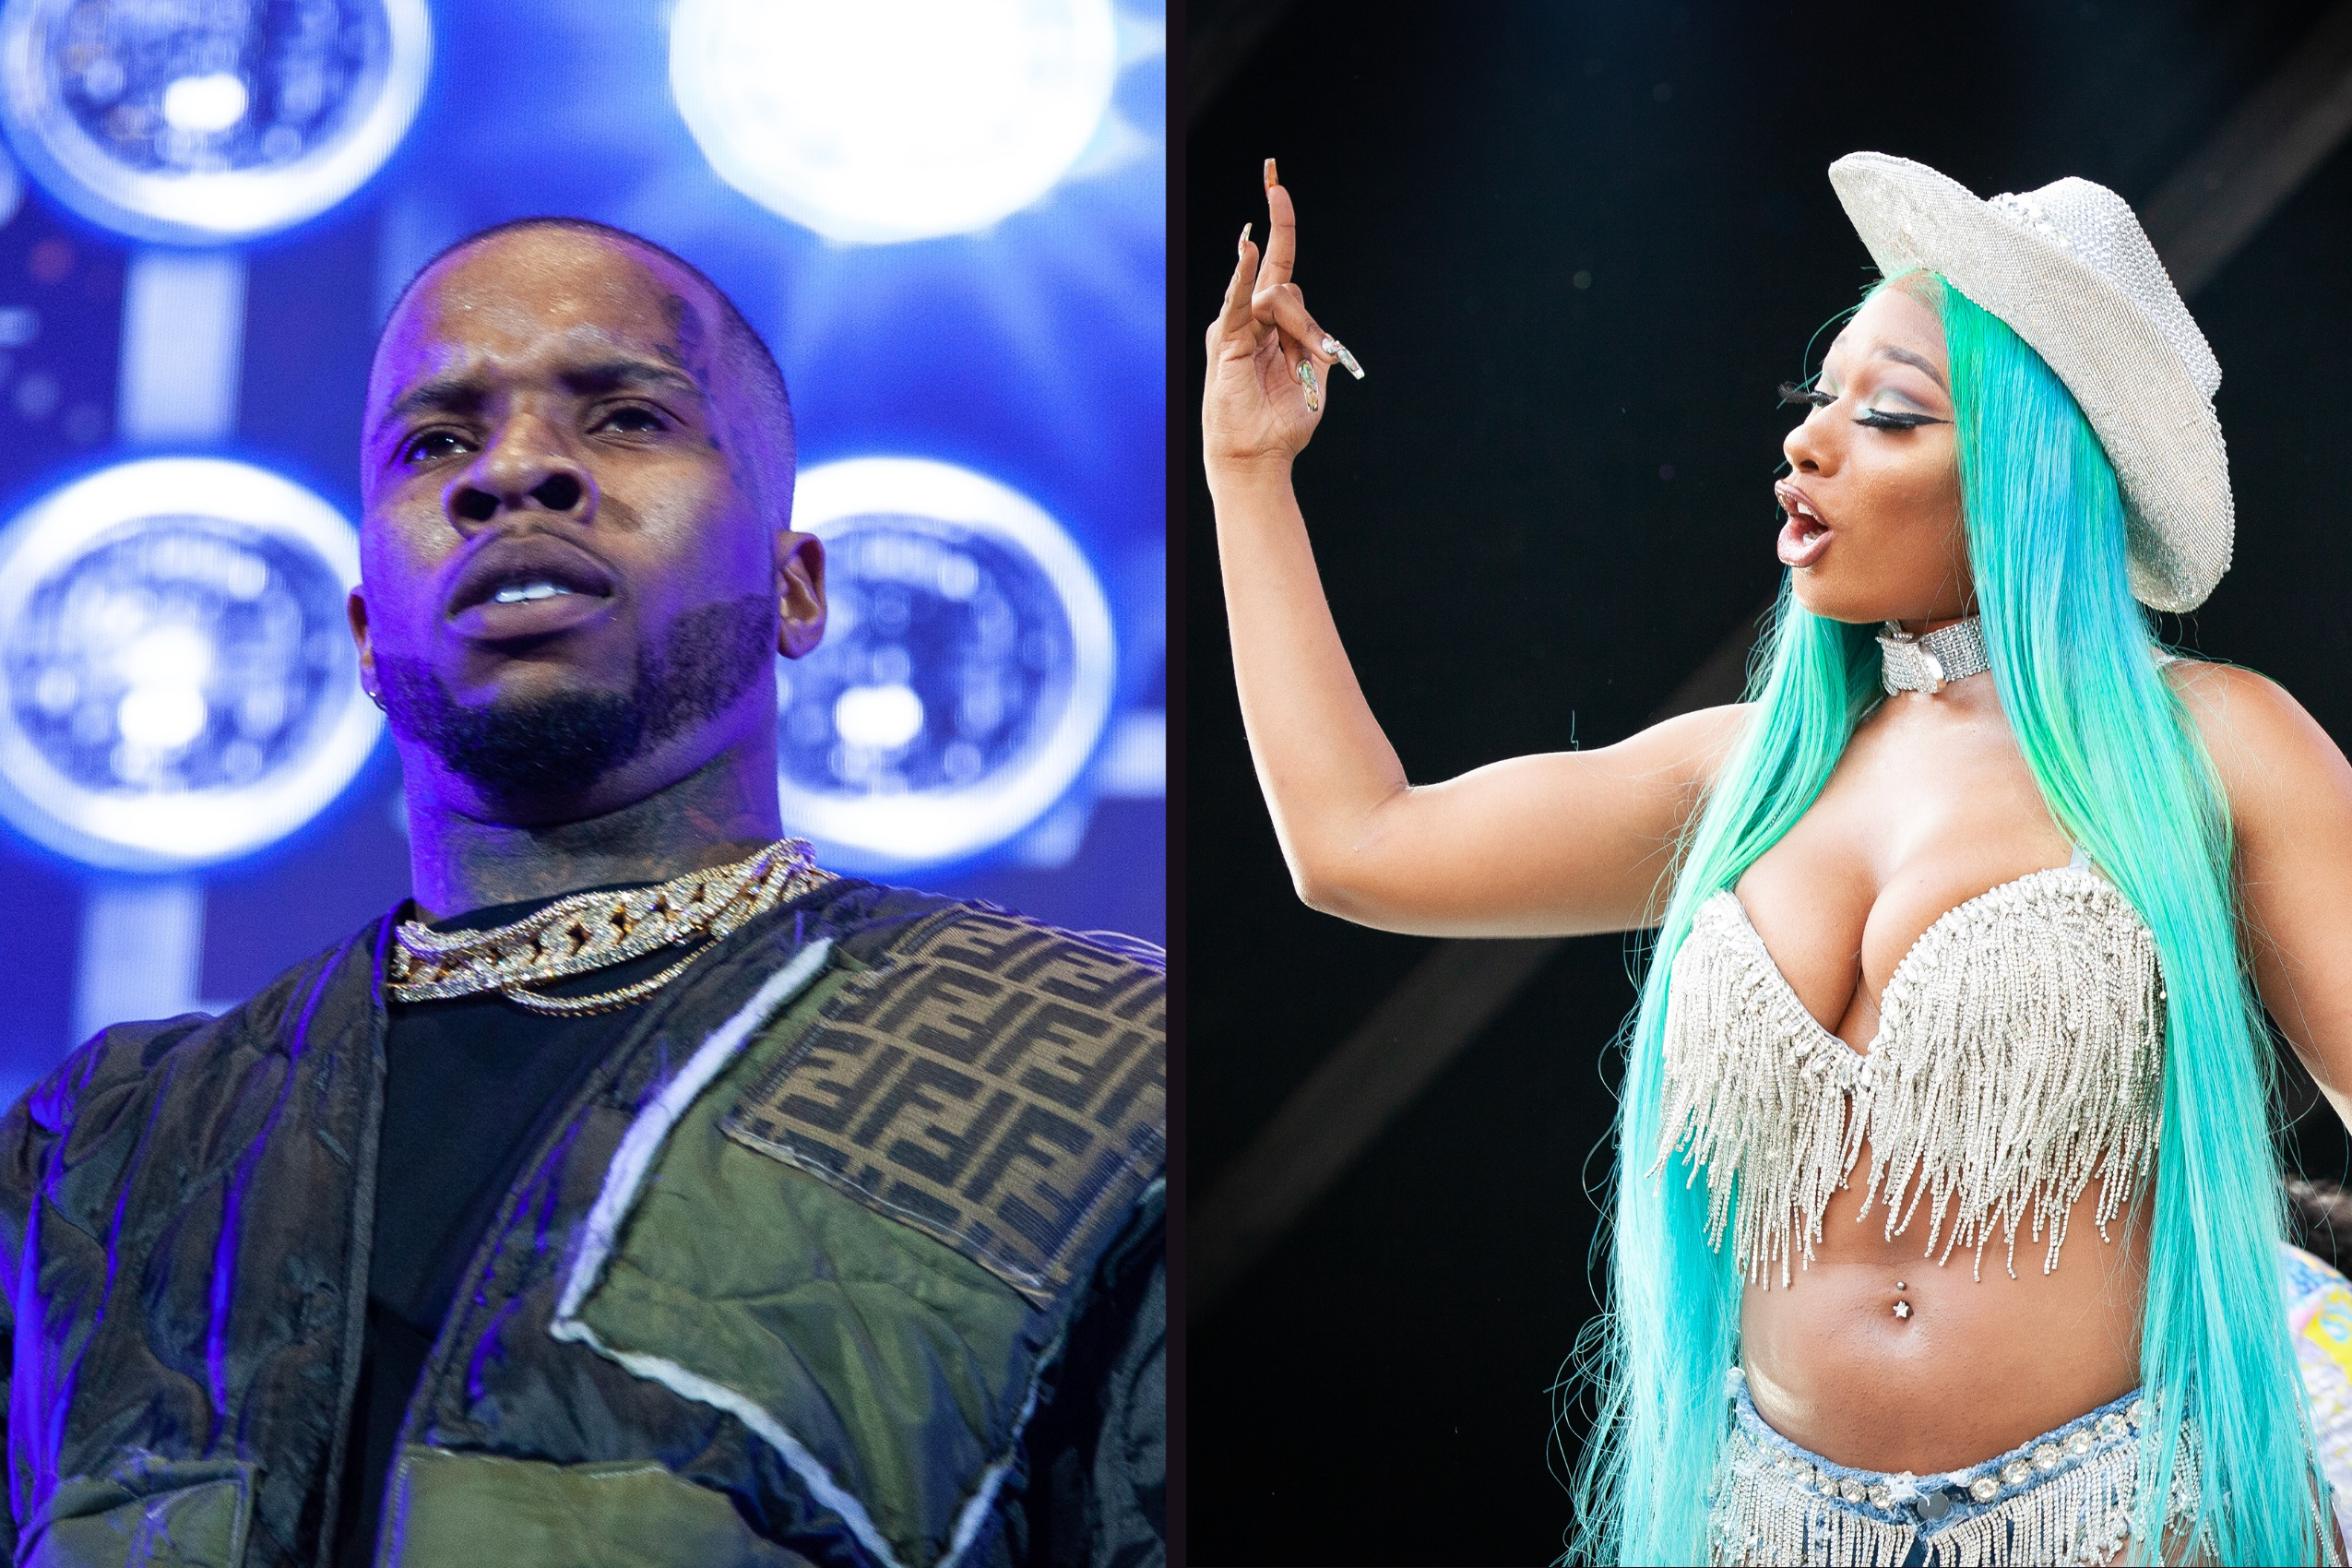 Tory Lanez Arrest On Gun Charge, Megan Thee Stallion Was With Him